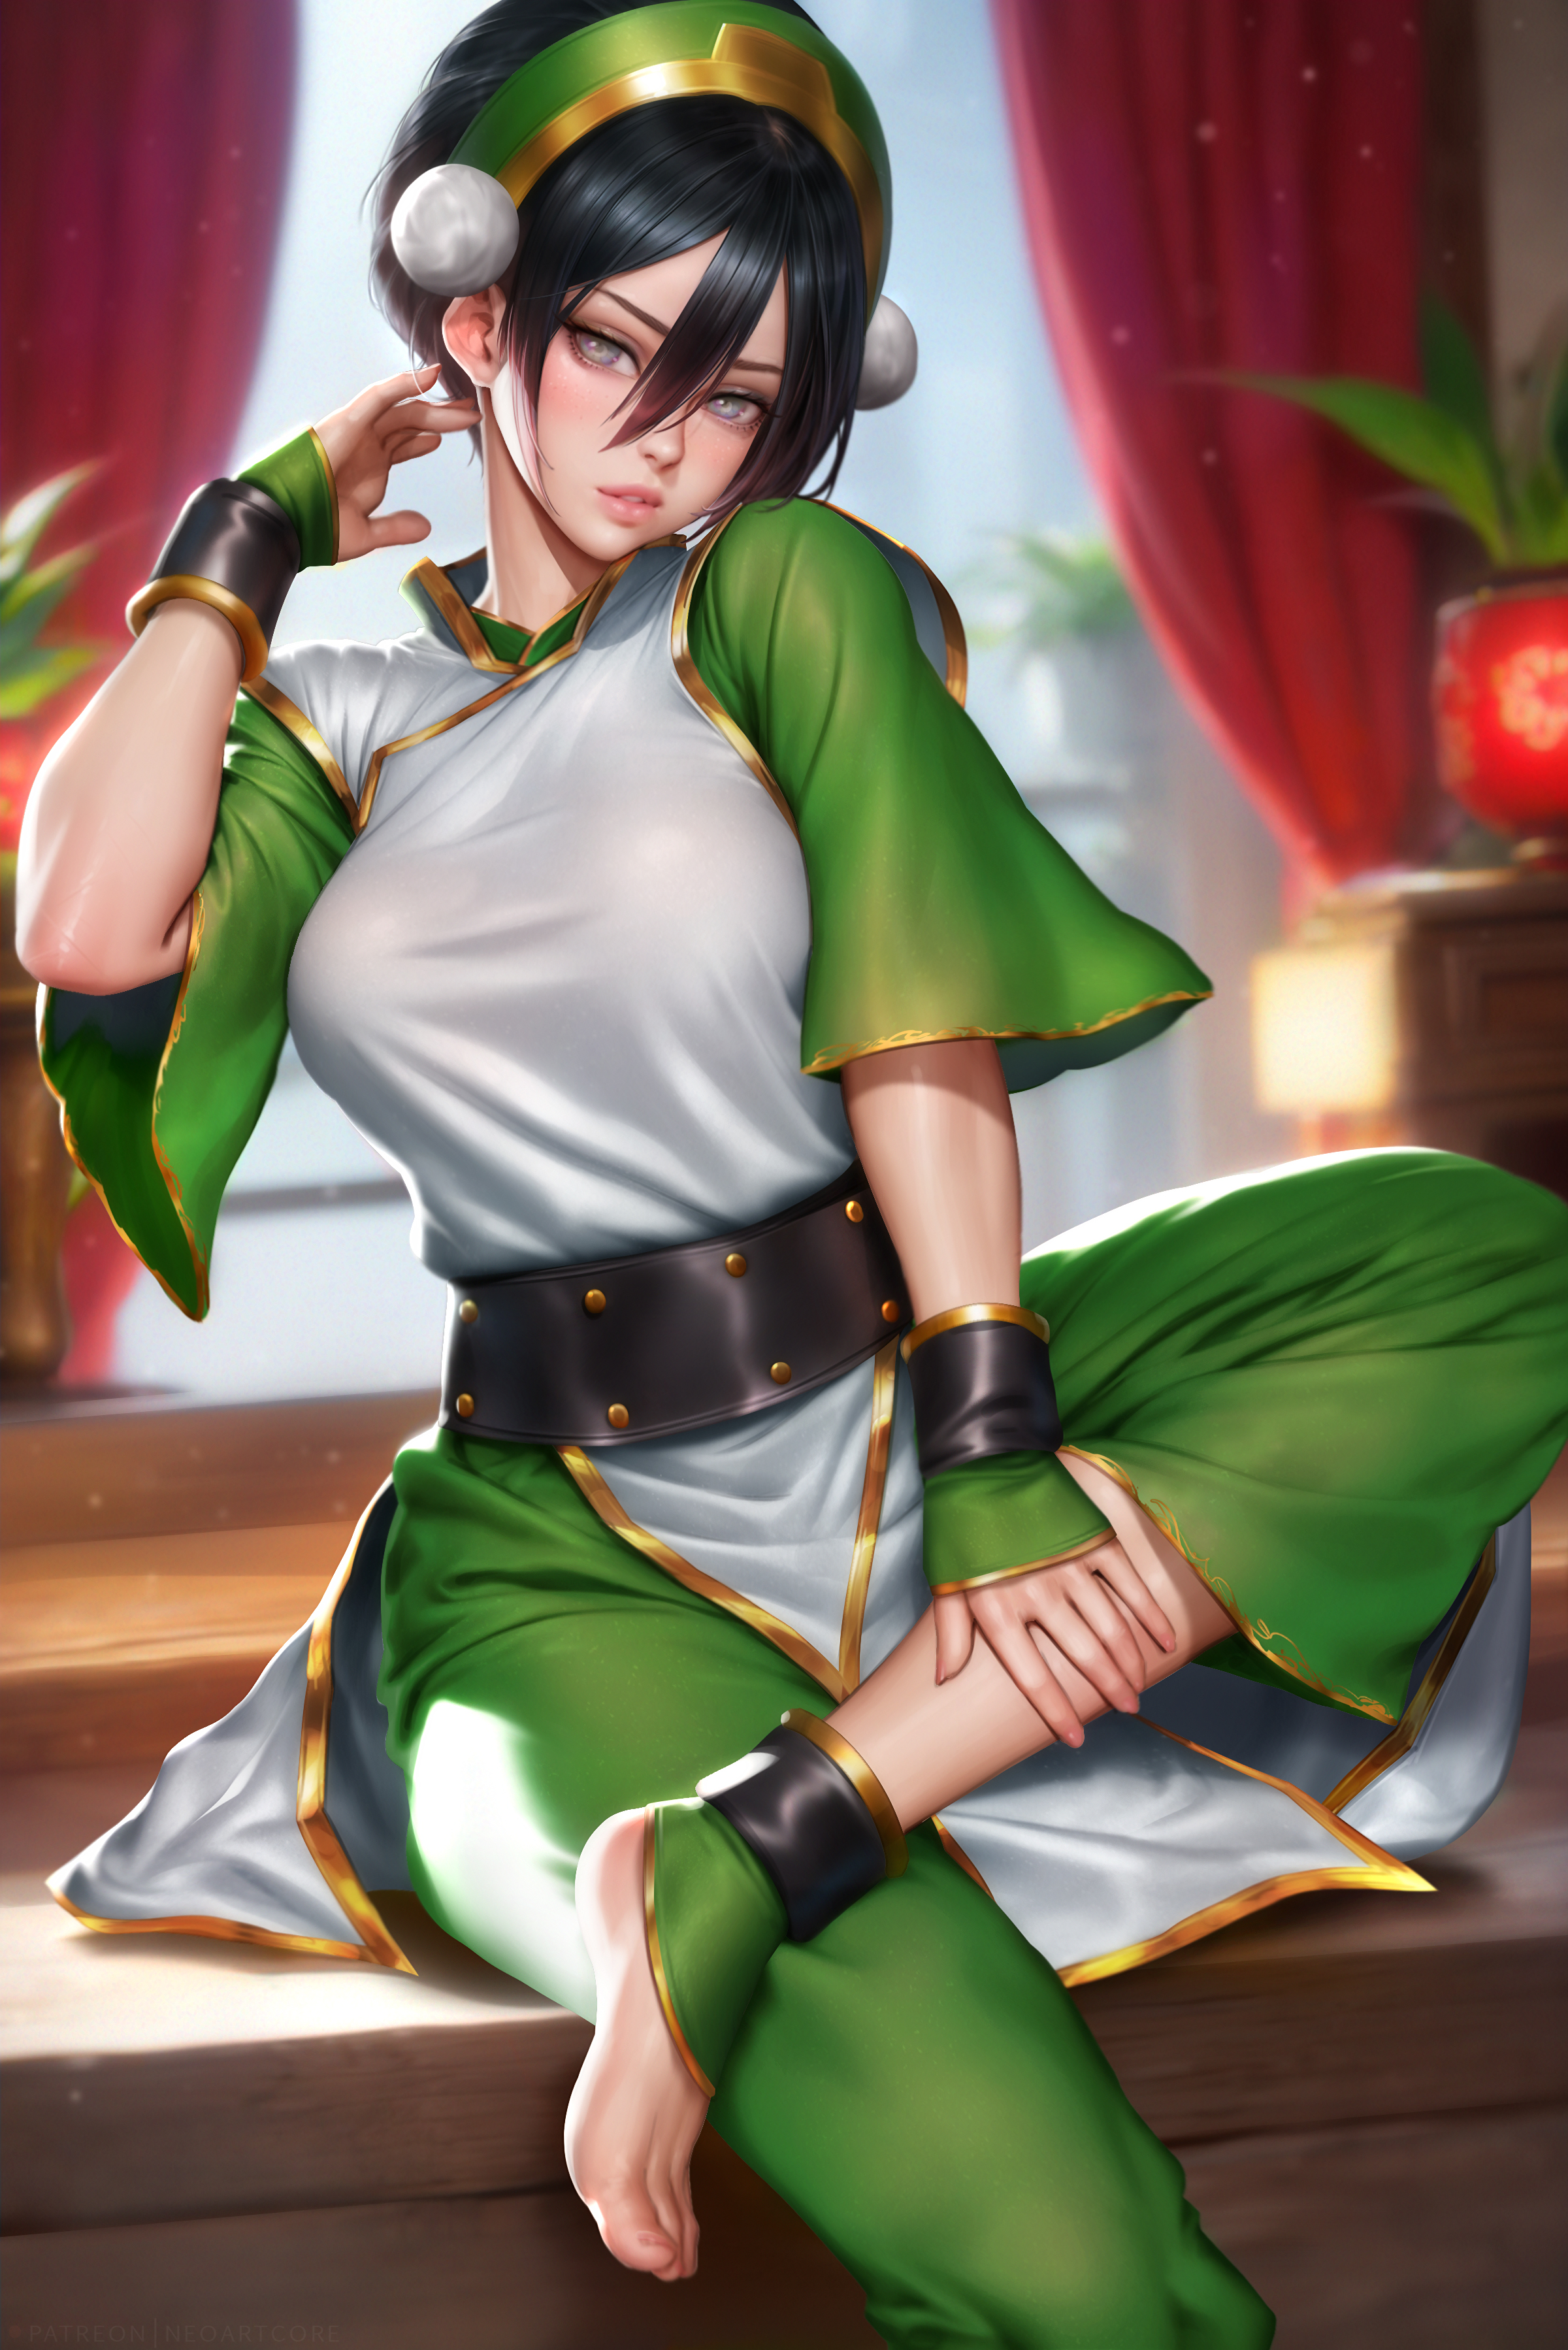 Toph Beifong Avatar The Last Airbender Nickelodeon Animated Series Artwork Drawing Fan Art NeoArtCor 2400x3597